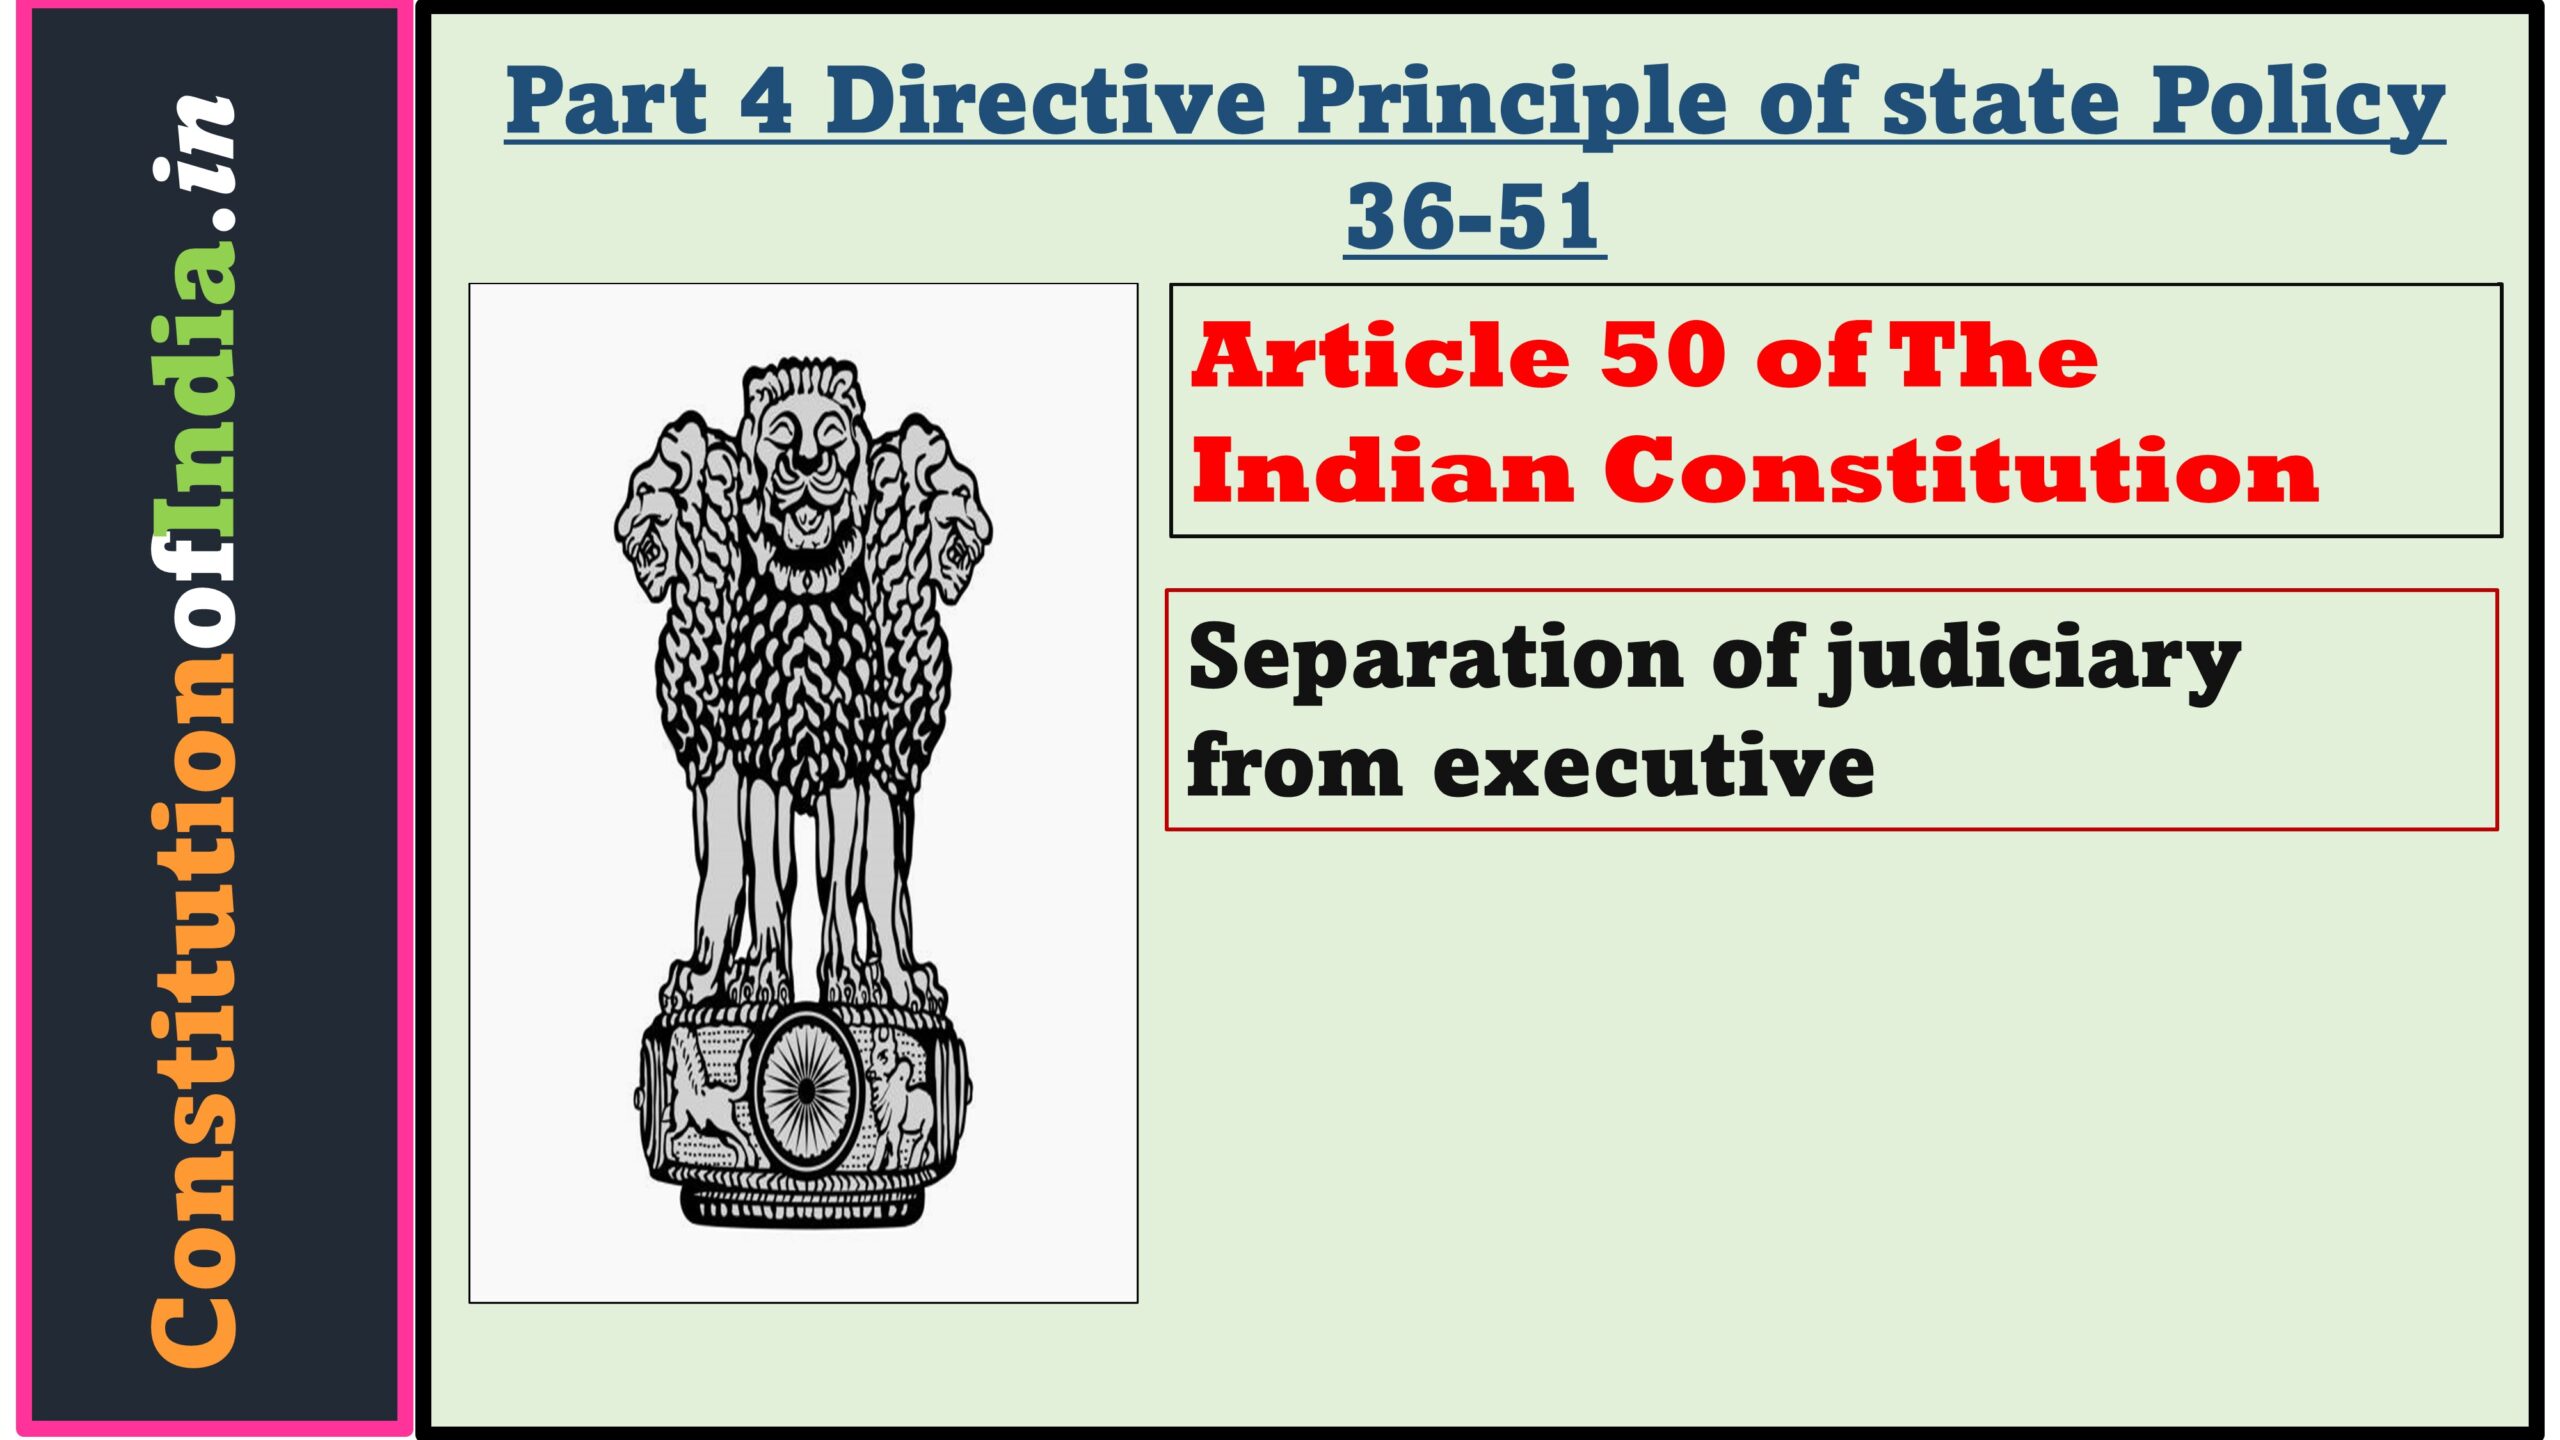 Article 50 of Indian Constitution: Separation of judiciary from executive.